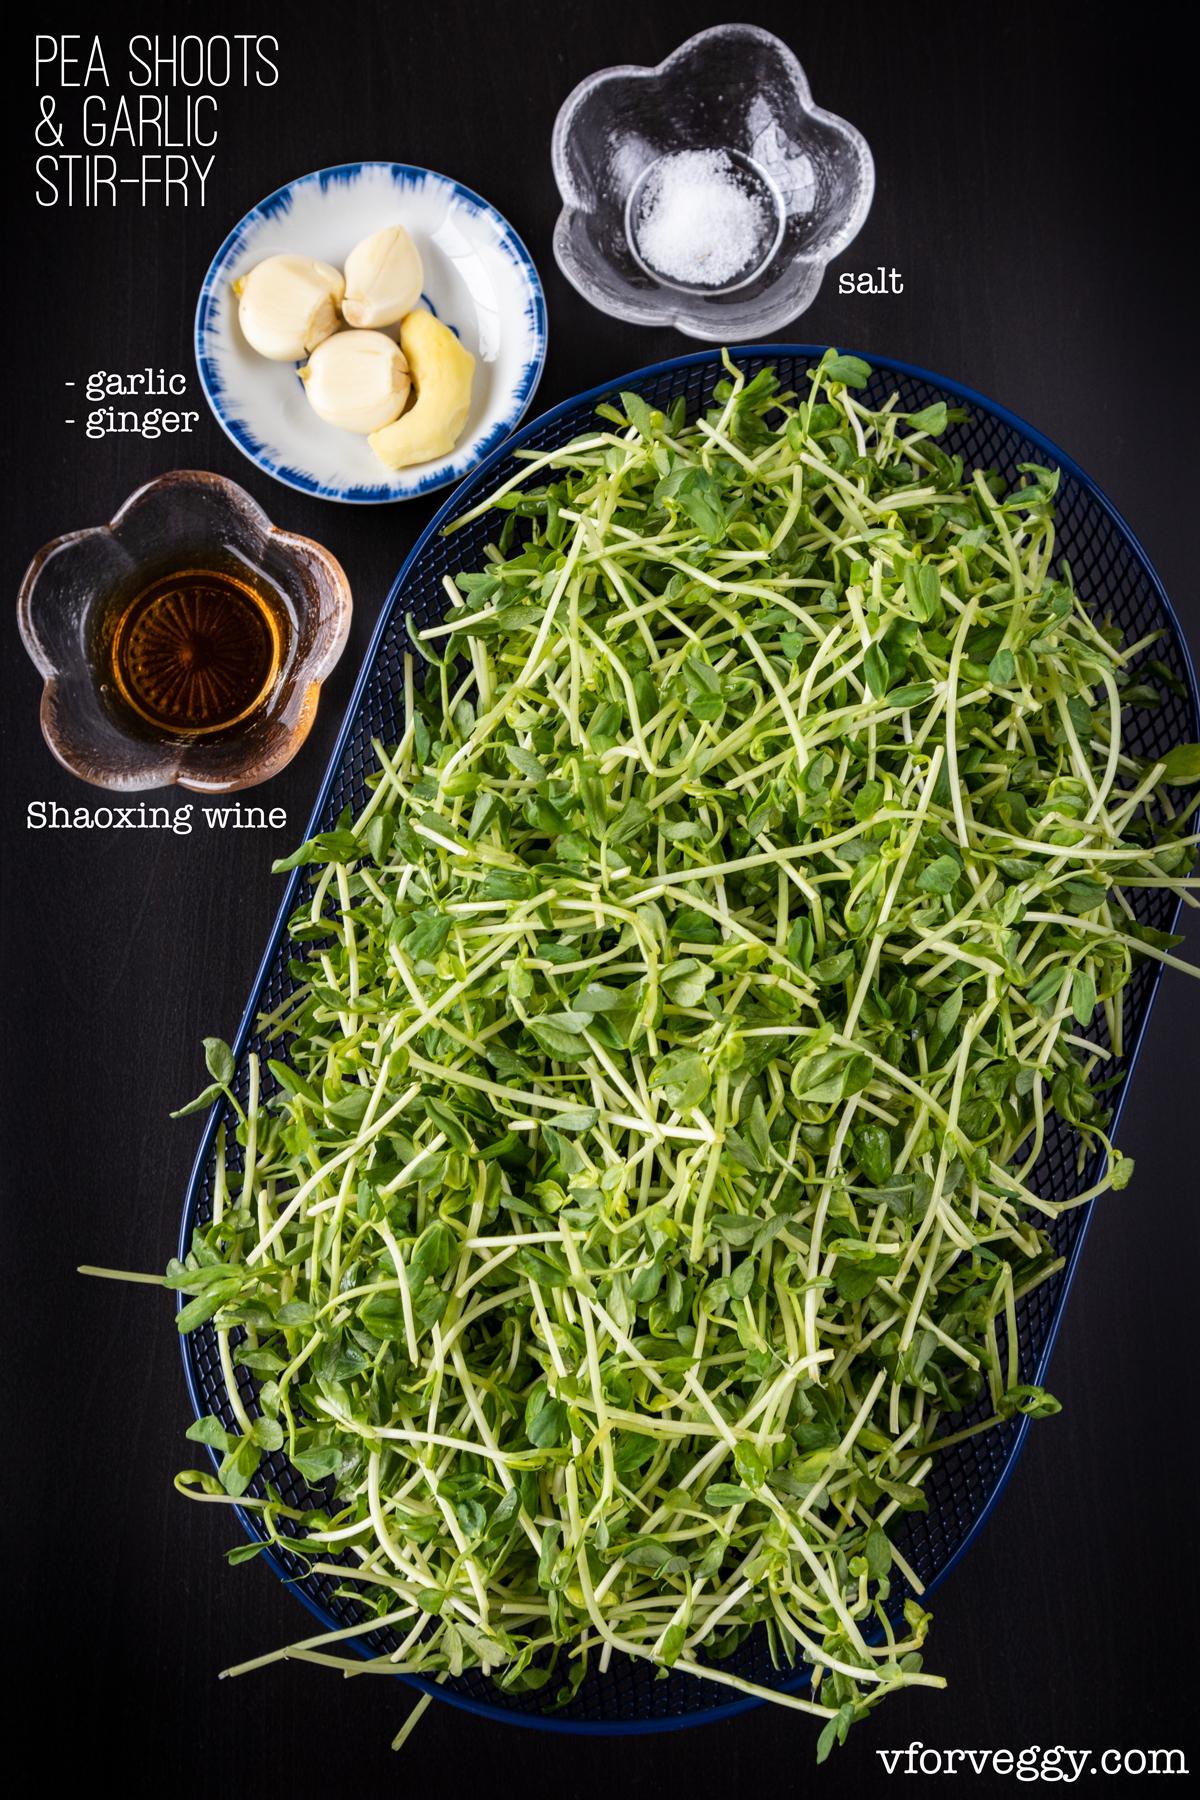 Ingredients for pea shoots and garlic stir-fry: pea shoots, garlic, ginger, Shaoxing wine, and salt.